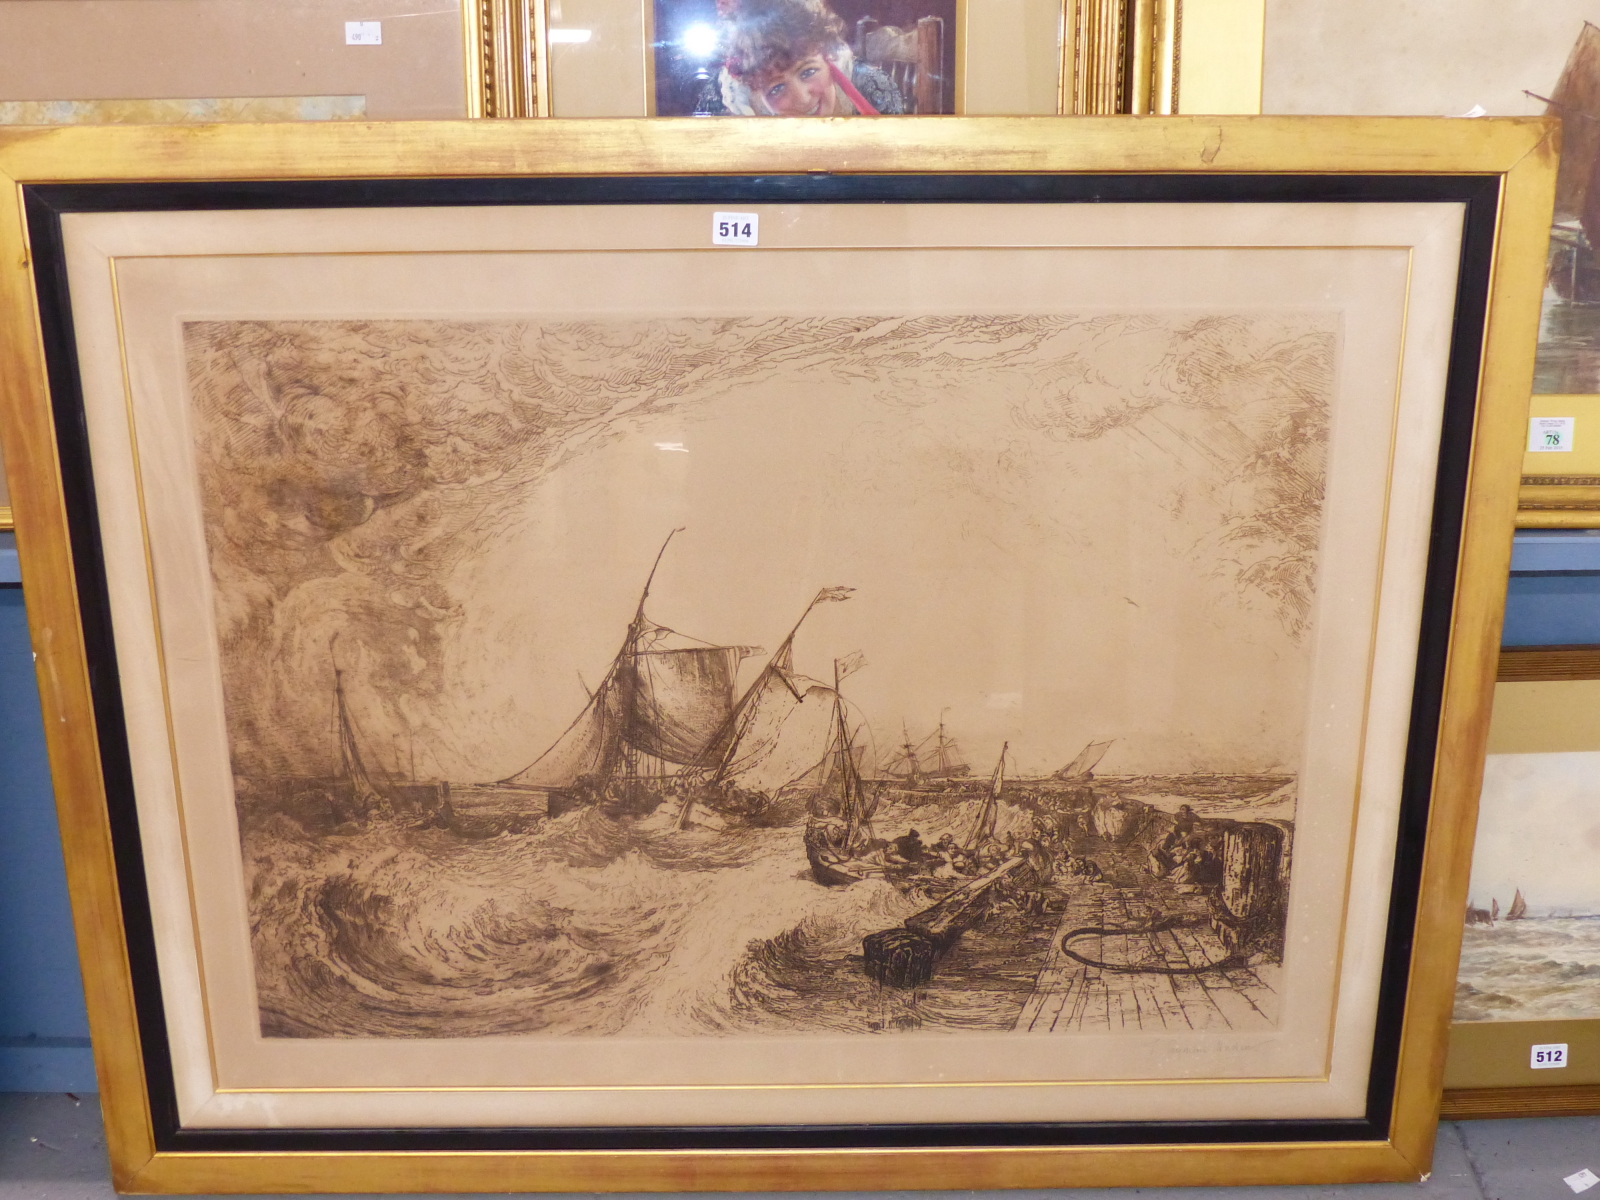 FRANCIS SEYMOUR HADEN AFTER J.M.W. TURNER, CALAIS PIER, SIGNED IN PENCIL, ETCHING, 84 x 60cms pl. - Image 2 of 7